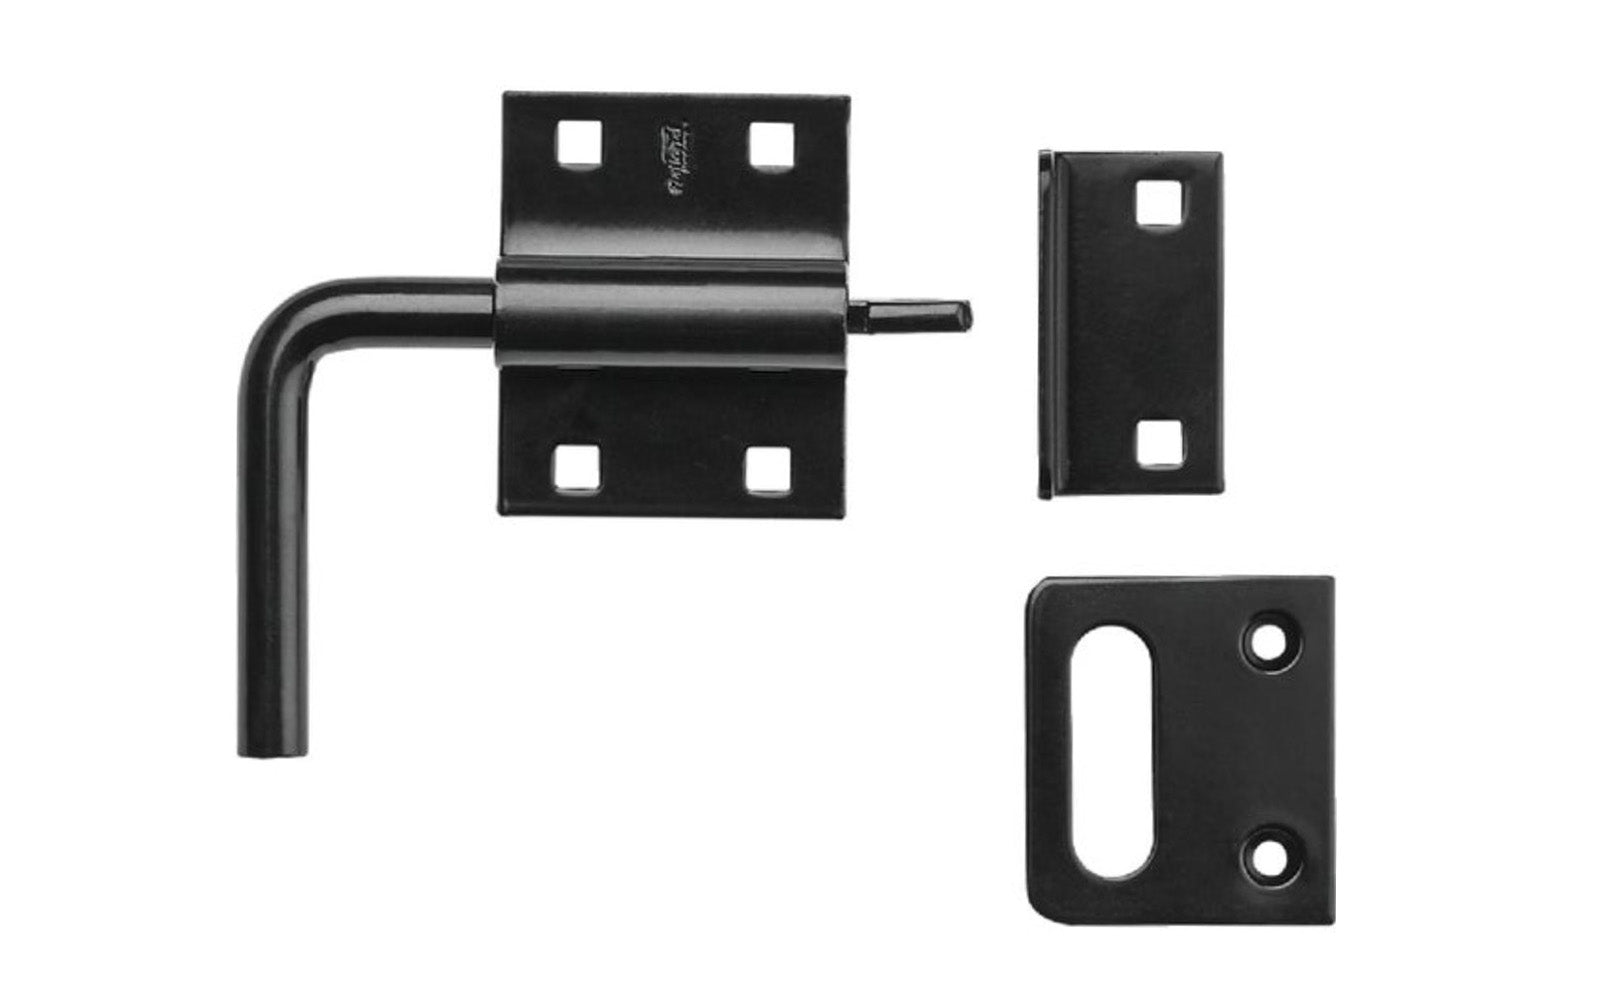 Black Finish Sliding Bolt Latch is designed for left or right hand swinging or sliding doors & gates. Includes surface mount & 90 degree strike plate option. Can be padlocked for added security. National Hardware Catalog Model No. N100-056. 886780017441